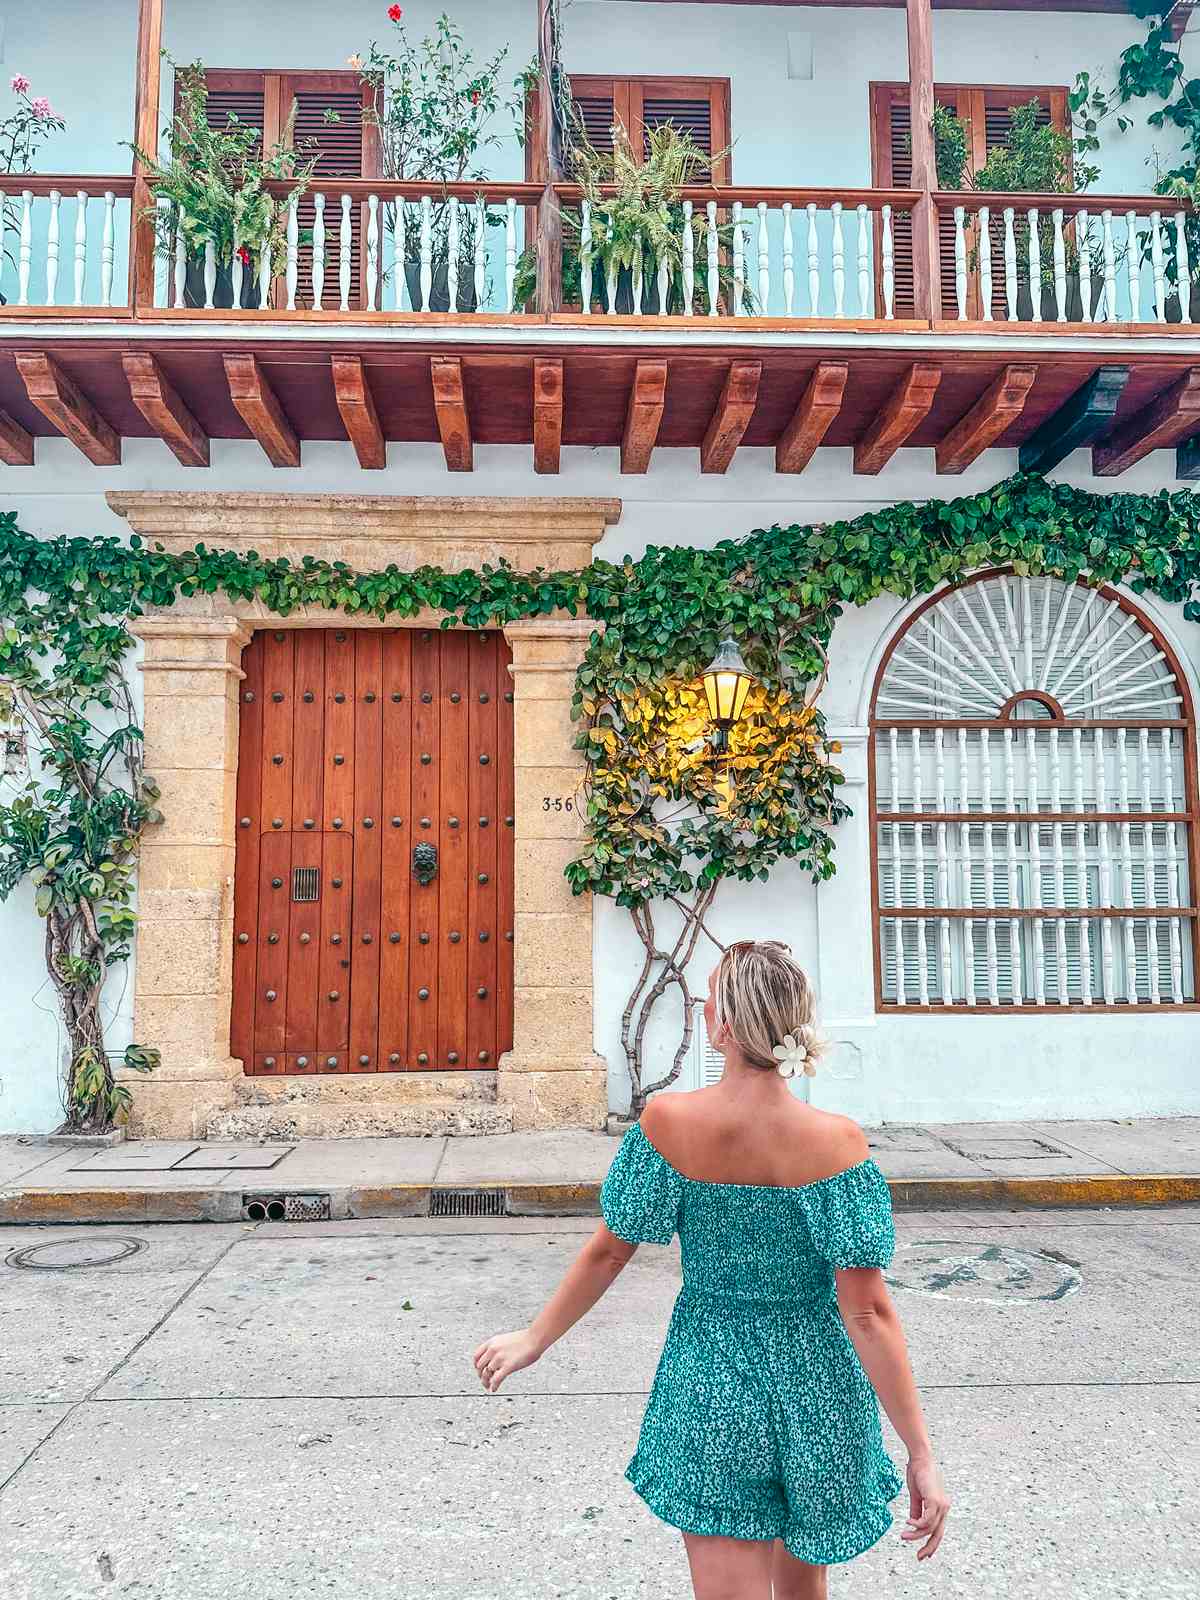 Wandering the streets of Cartagena